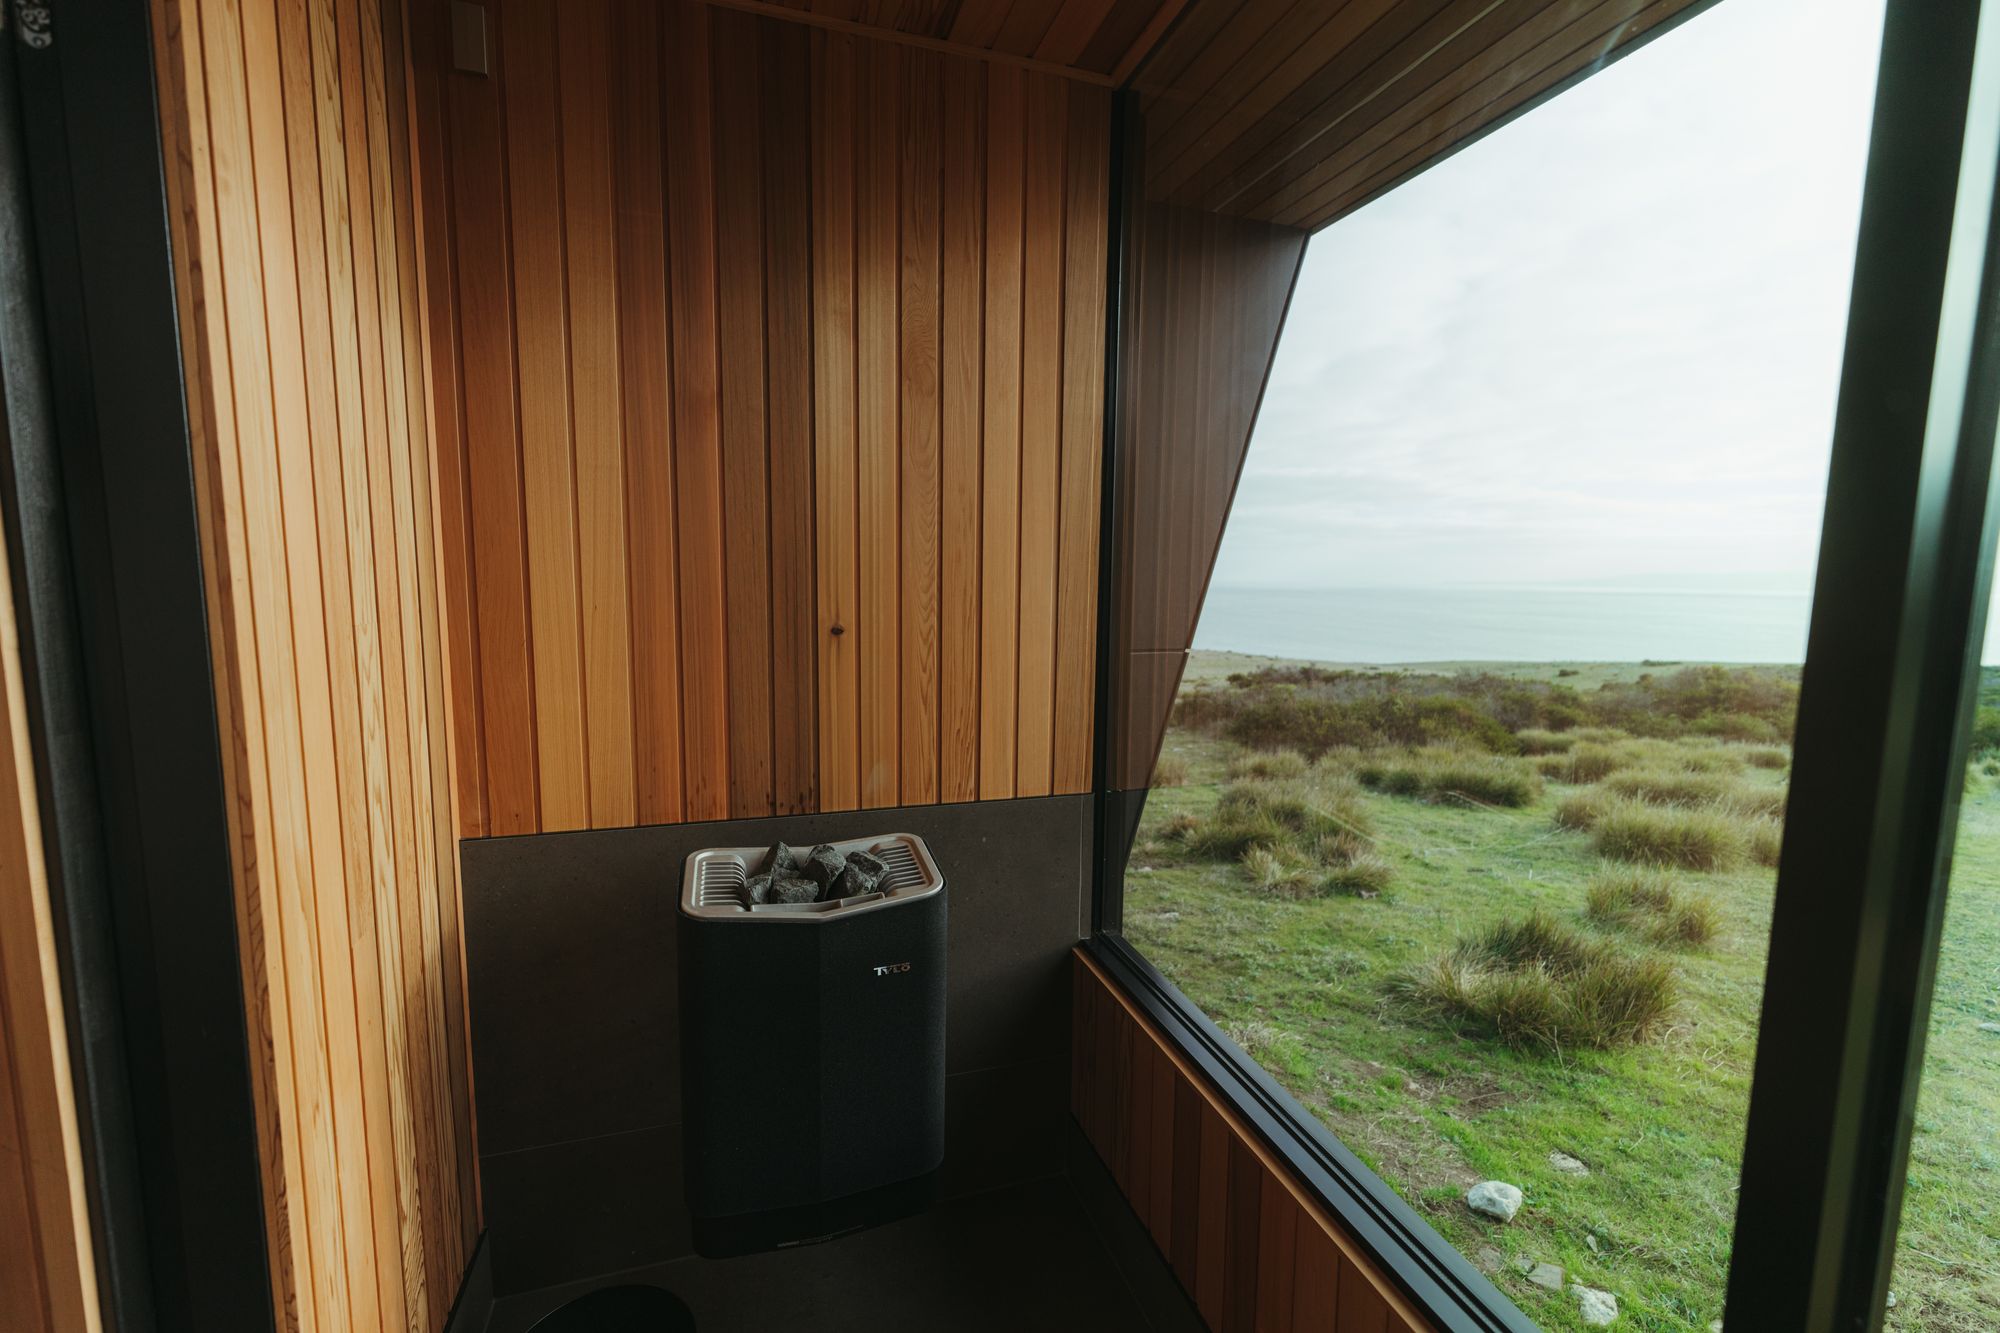 CABN X Cape St Albans. Sauna with views out to property.